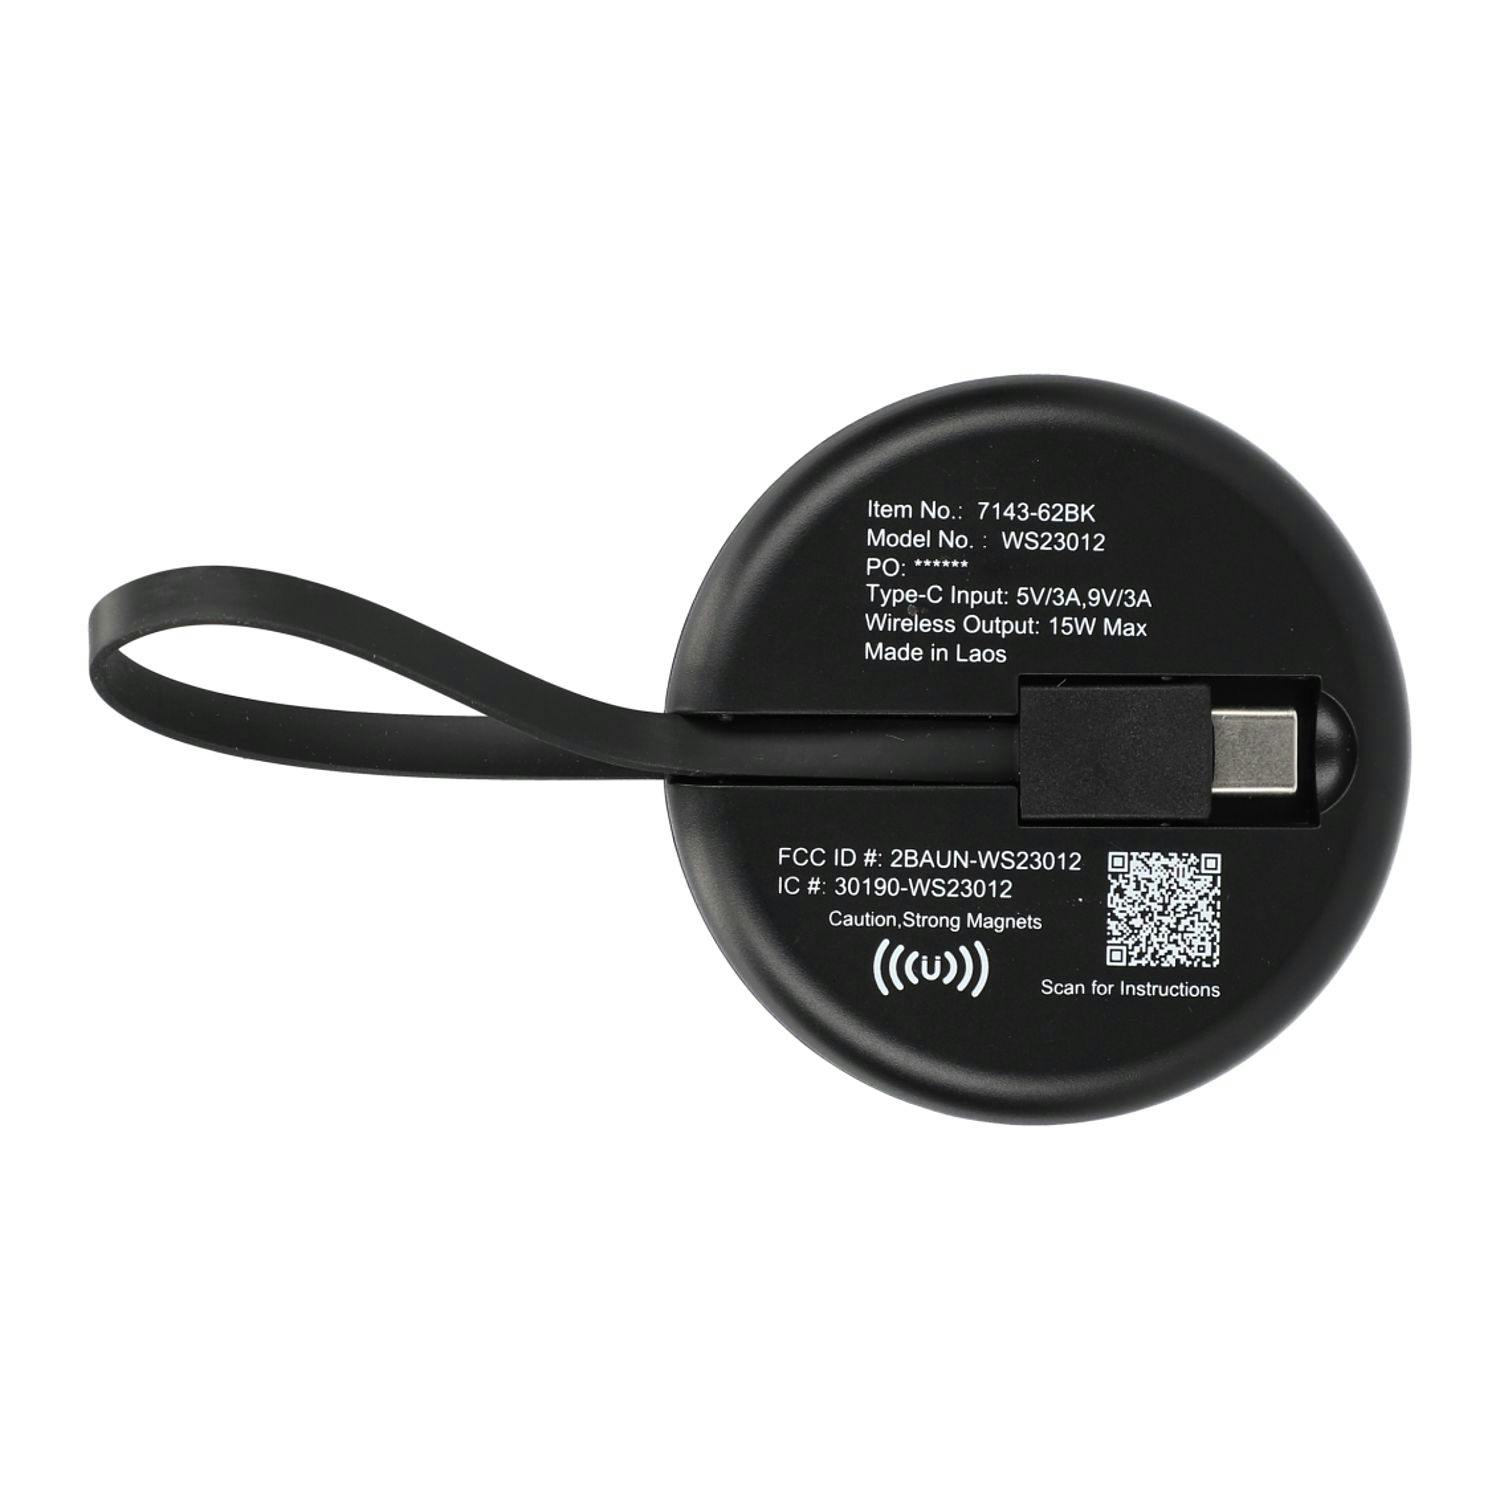 All-In-One Universal Travel 15W Wireless Charger - additional Image 4